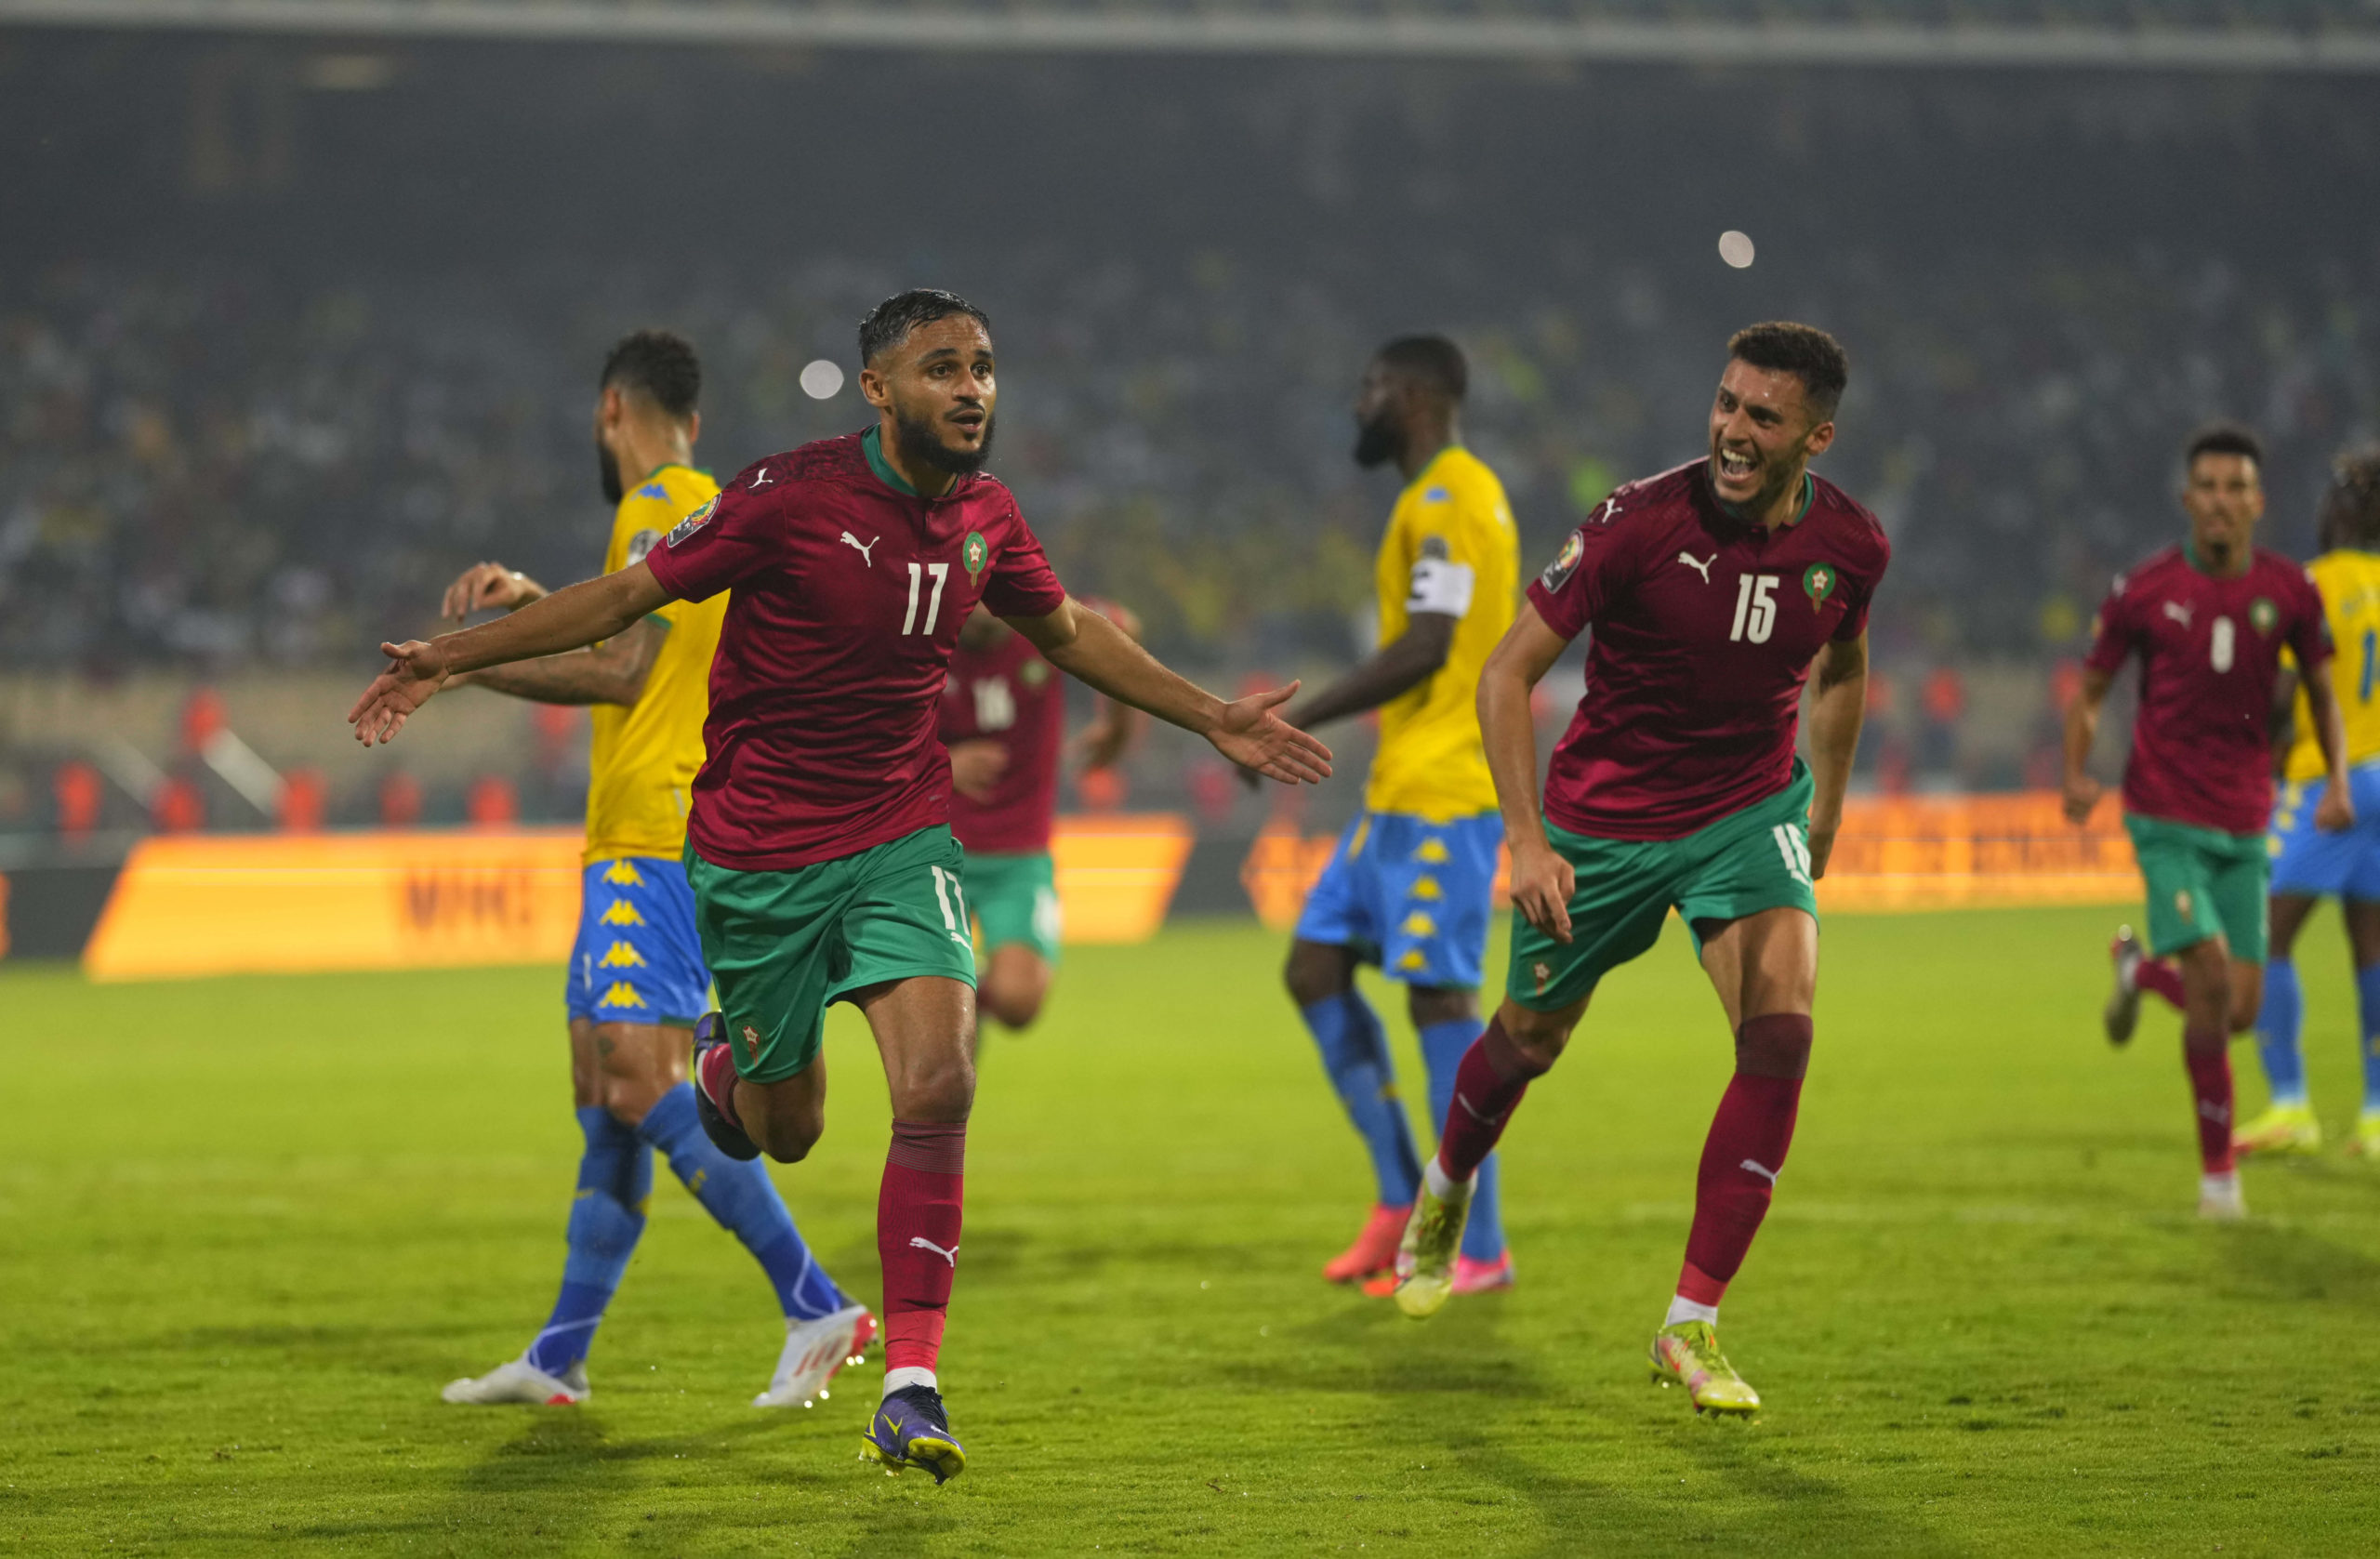 Sofiane Boufal of Morocco celebrates scoring their first goal during Morocco against Gabon, African Cup of Nations, at Ahmadou Ahidjo Stadium on January 18, 2022. (Photo by Ulrik Pedersen/NurPhoto via Getty Images)